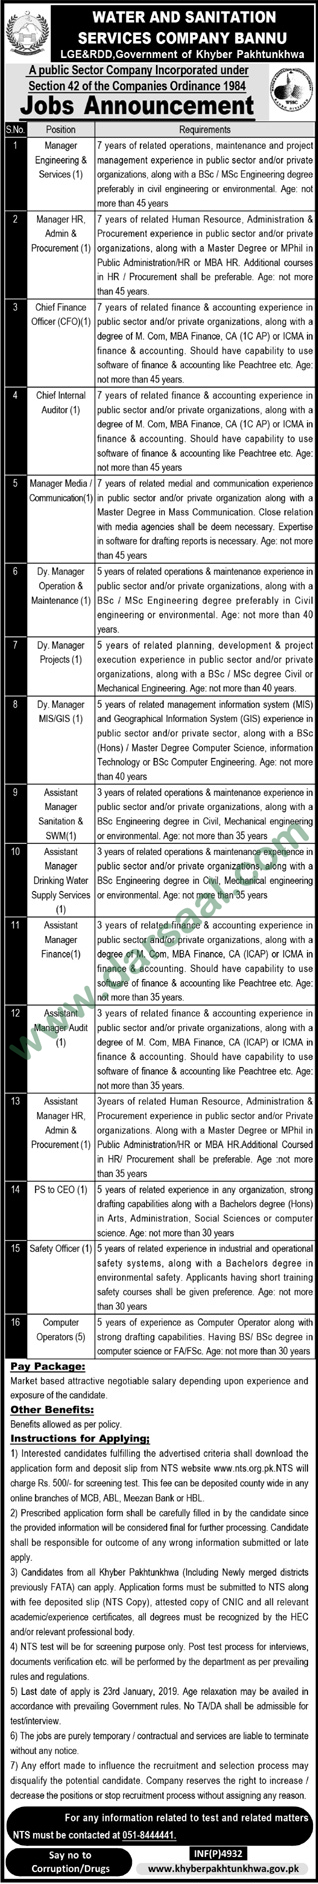 Assistant Manager Jobs in Water & Sanitation Services Company Bannu in Bannu - Dec 27, 2018